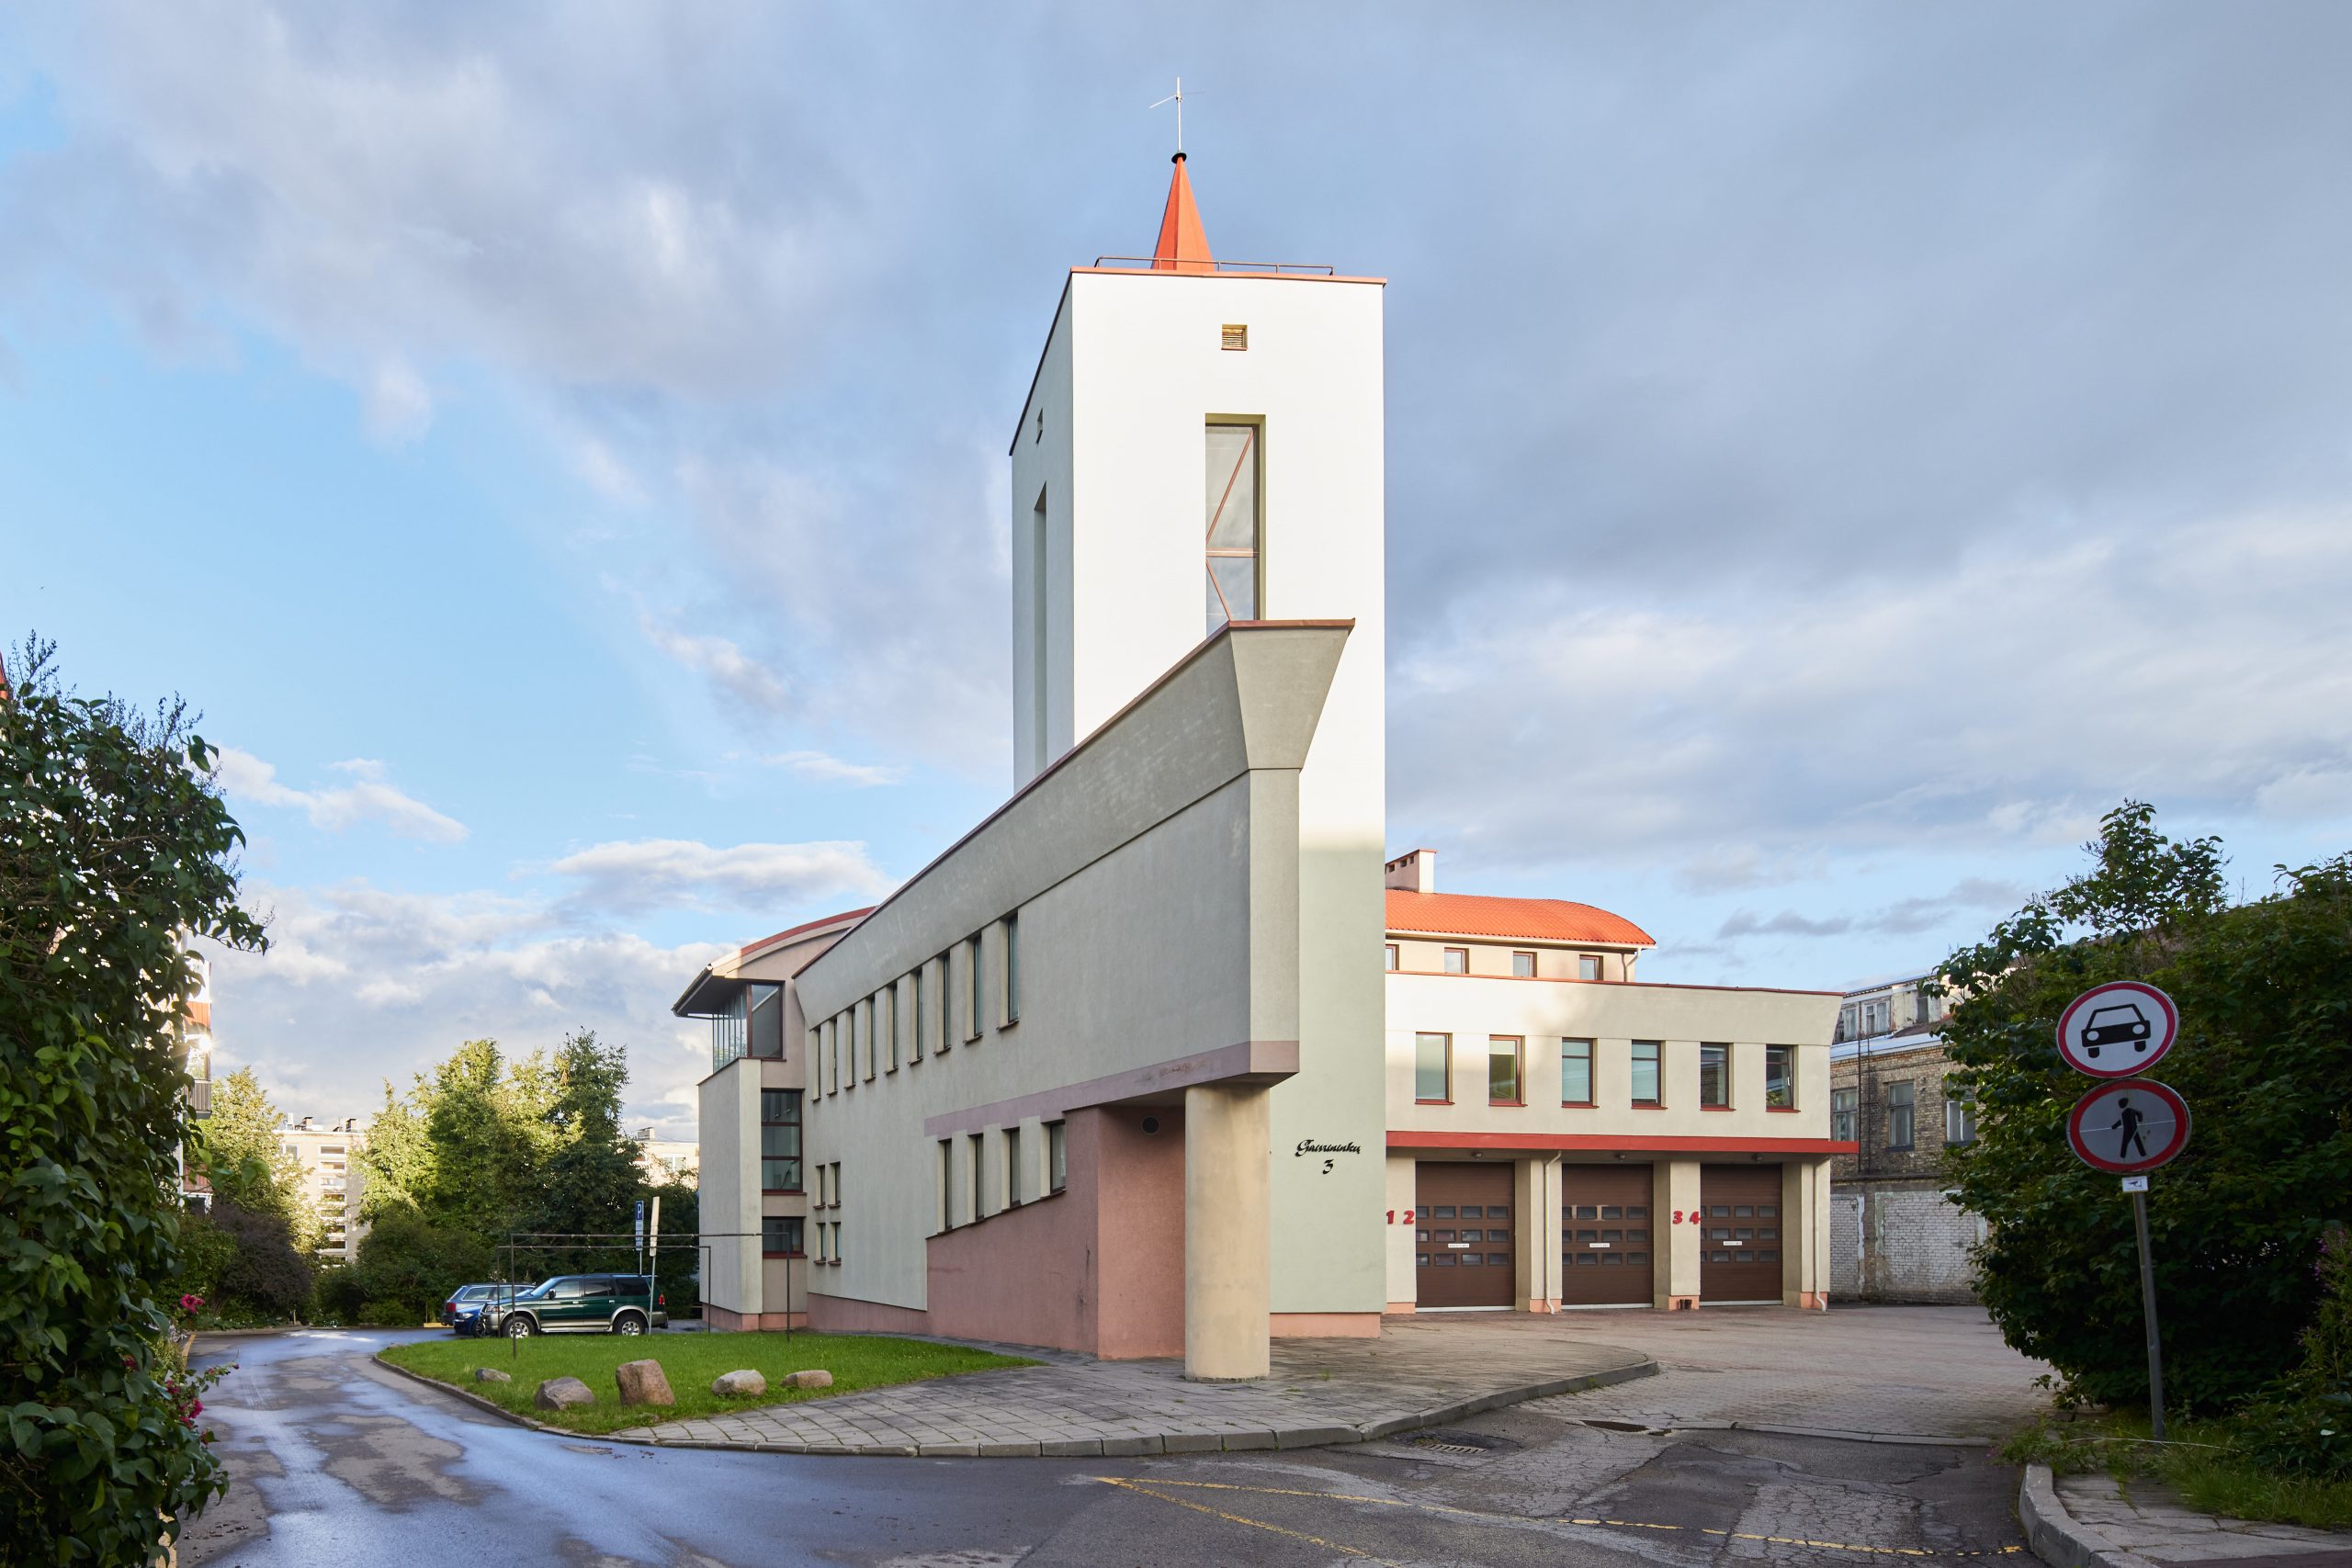 Šiauliai district fire and rescue station (2nd team)